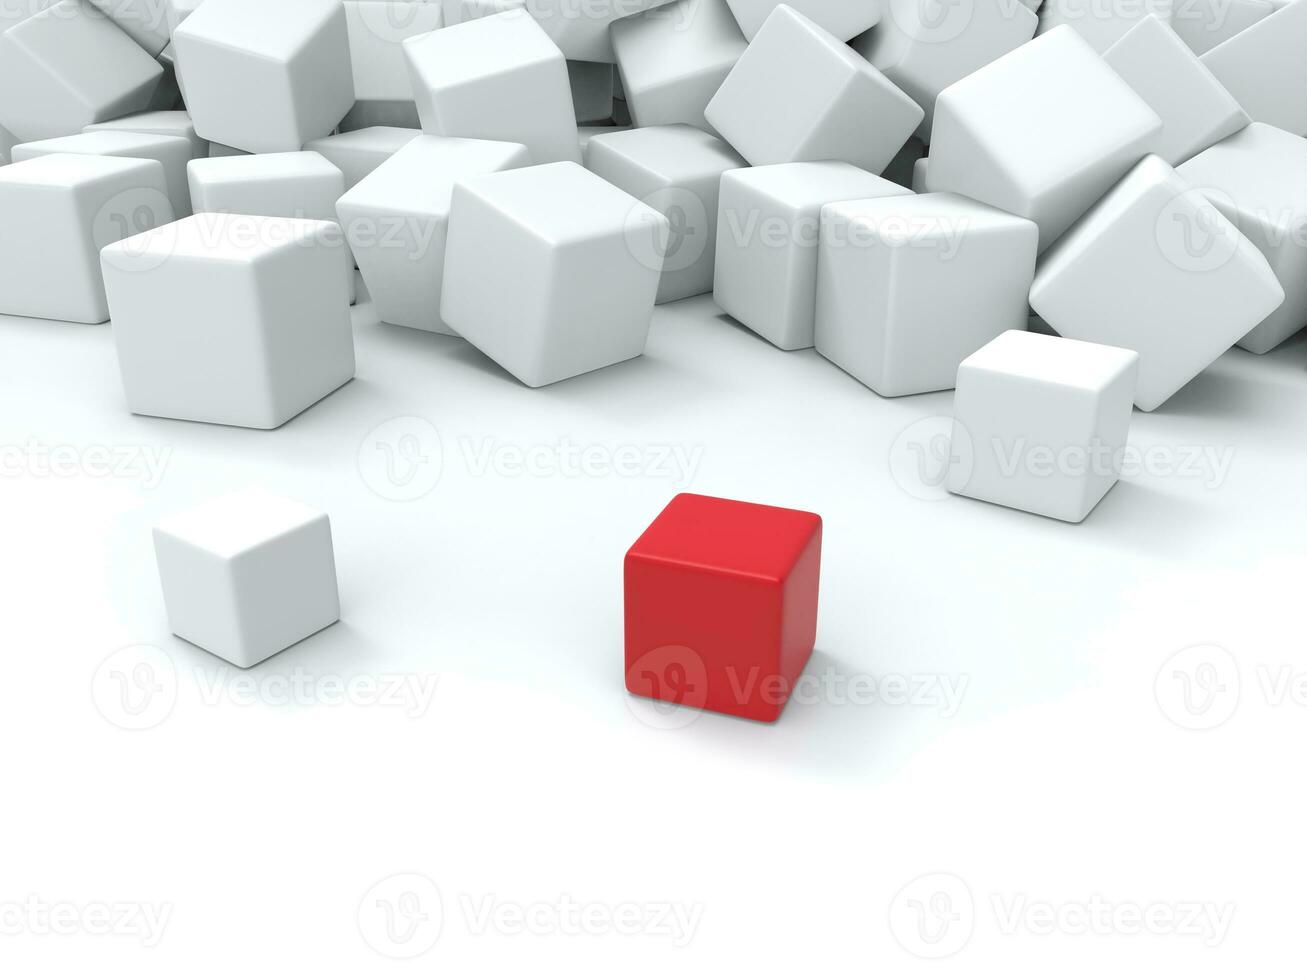 Red cube stands out on a white background filled with other white cubes - abstract background photo